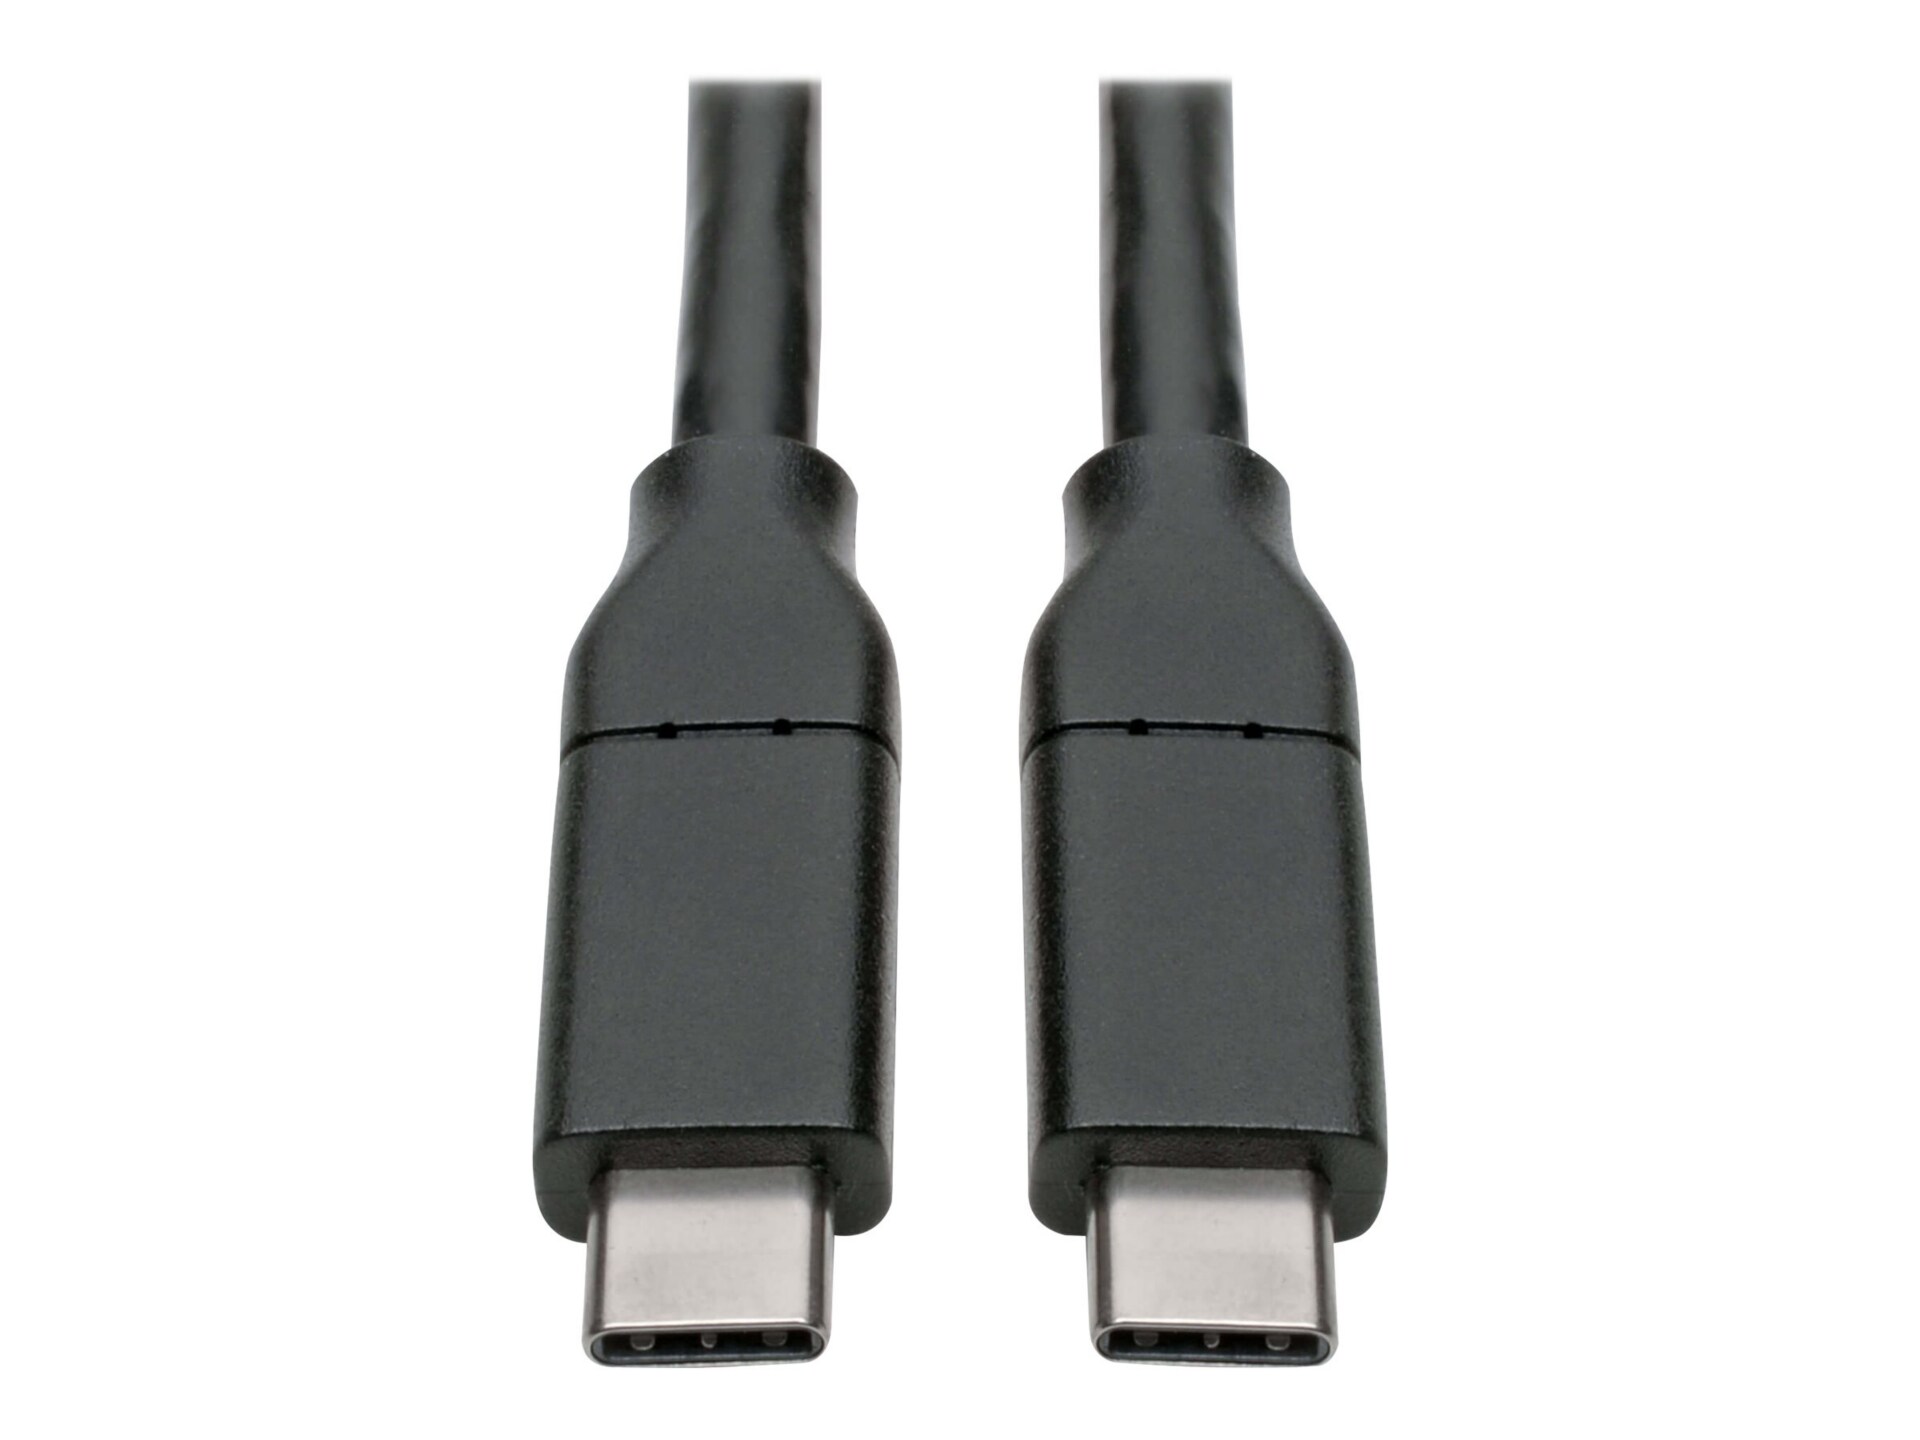 Eaton Tripp Lite Series USB-C Cable (M/M), USB 2.0, 5A (100W) Rated, USB-IF Certified, 13 ft. (3.96 m) - USB-C cable -